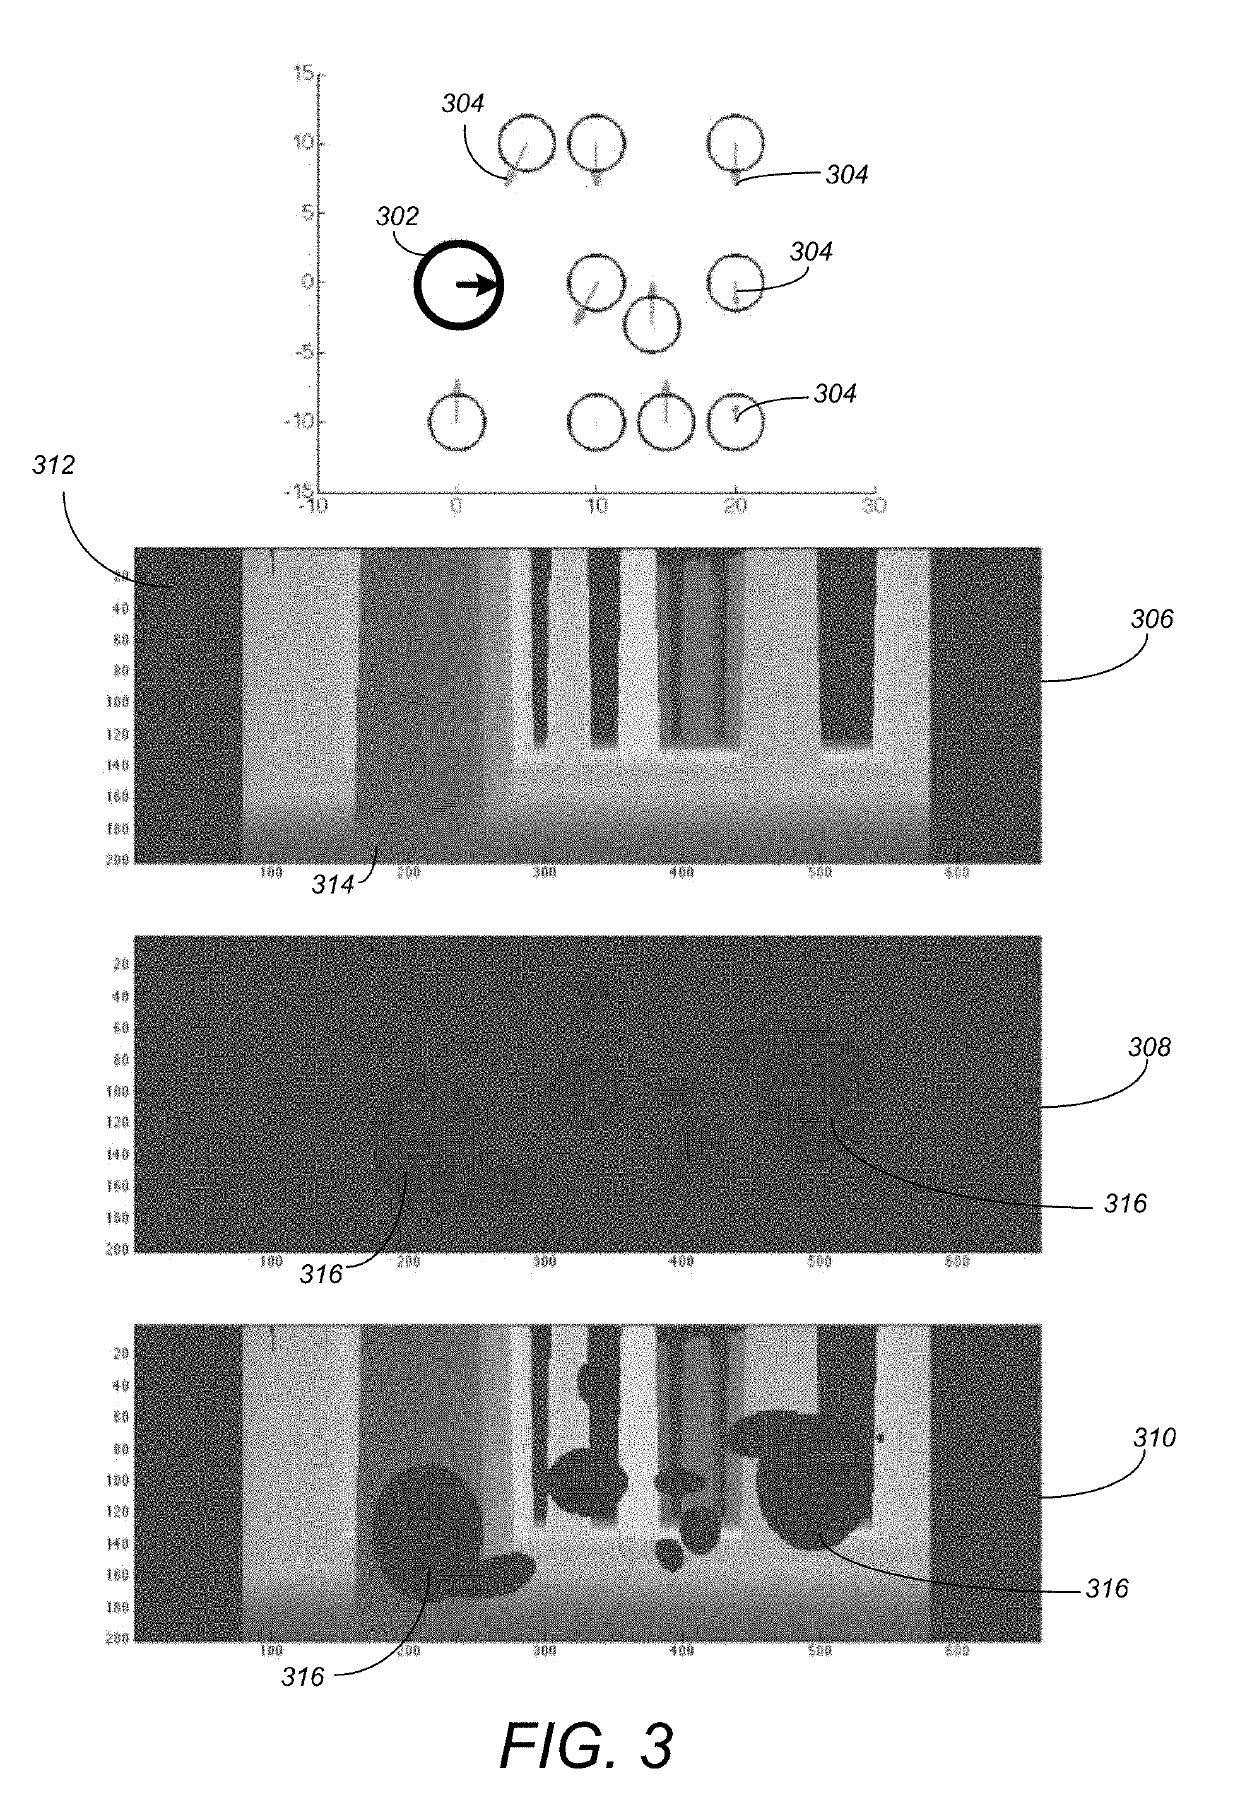 Simultaneous representation of moving and static obstacles for automatically controlled vehicles